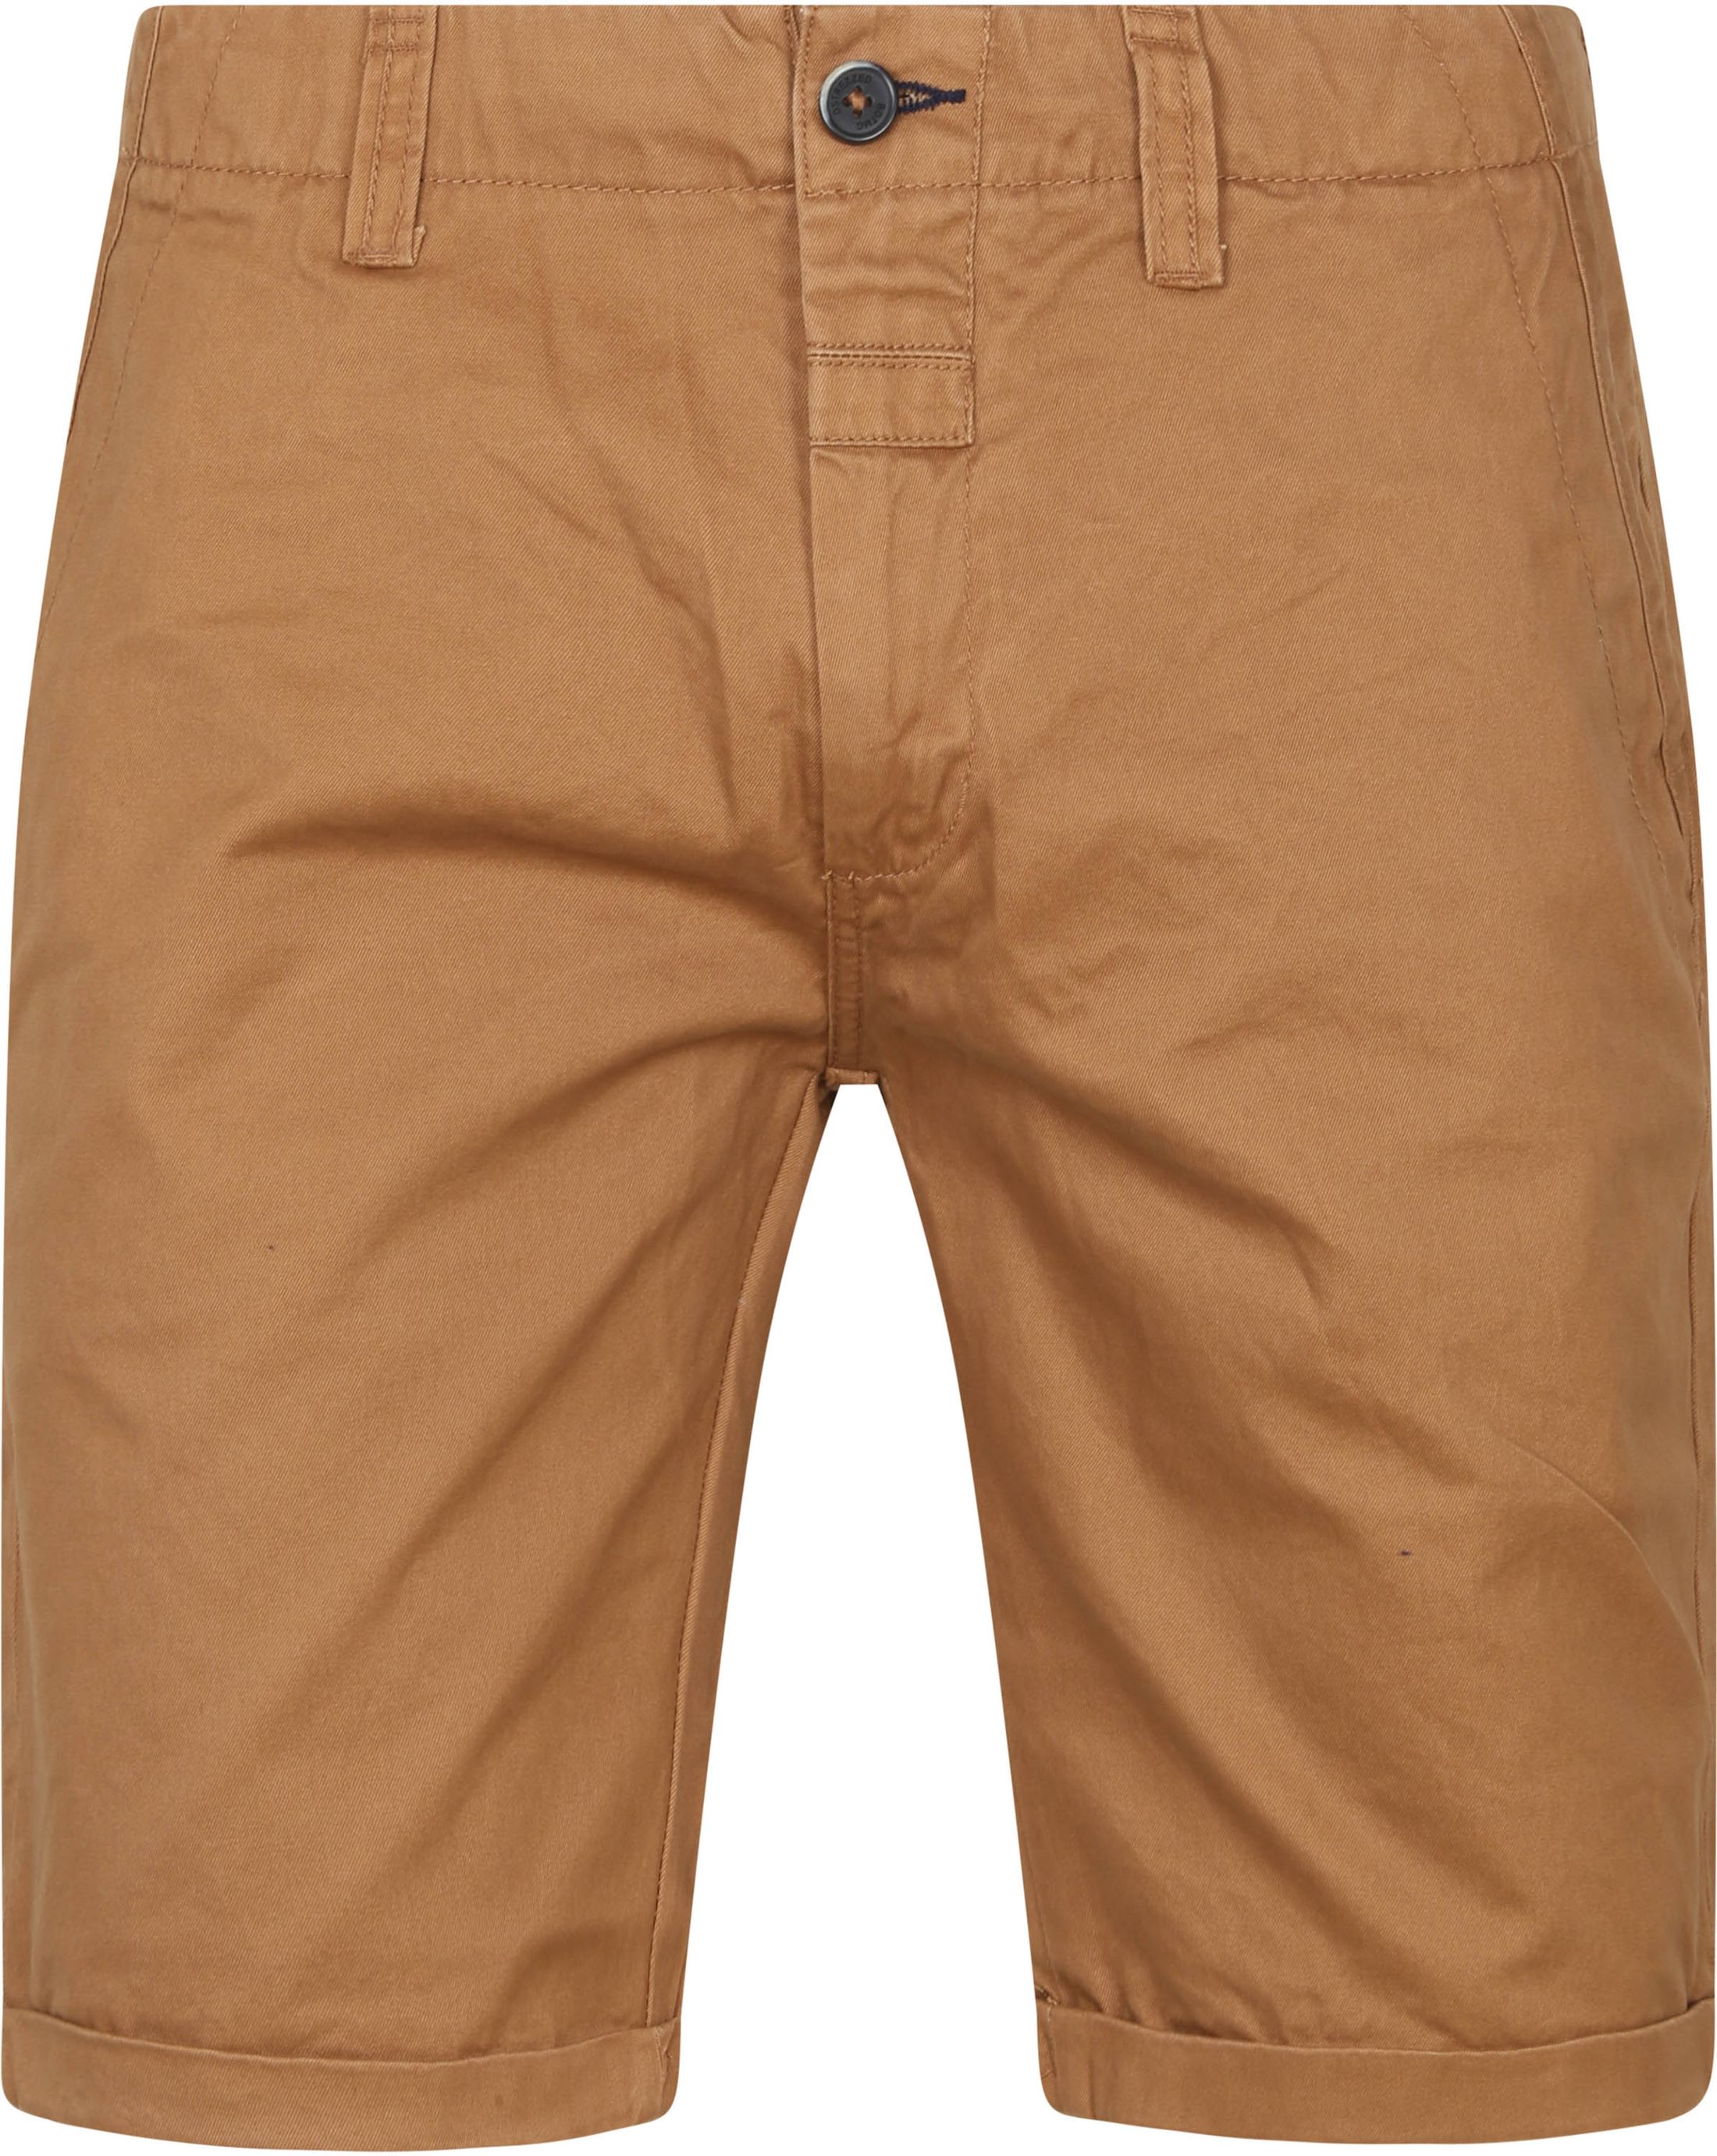 Dstrezzed Presley Chino Shorts Brown size 34